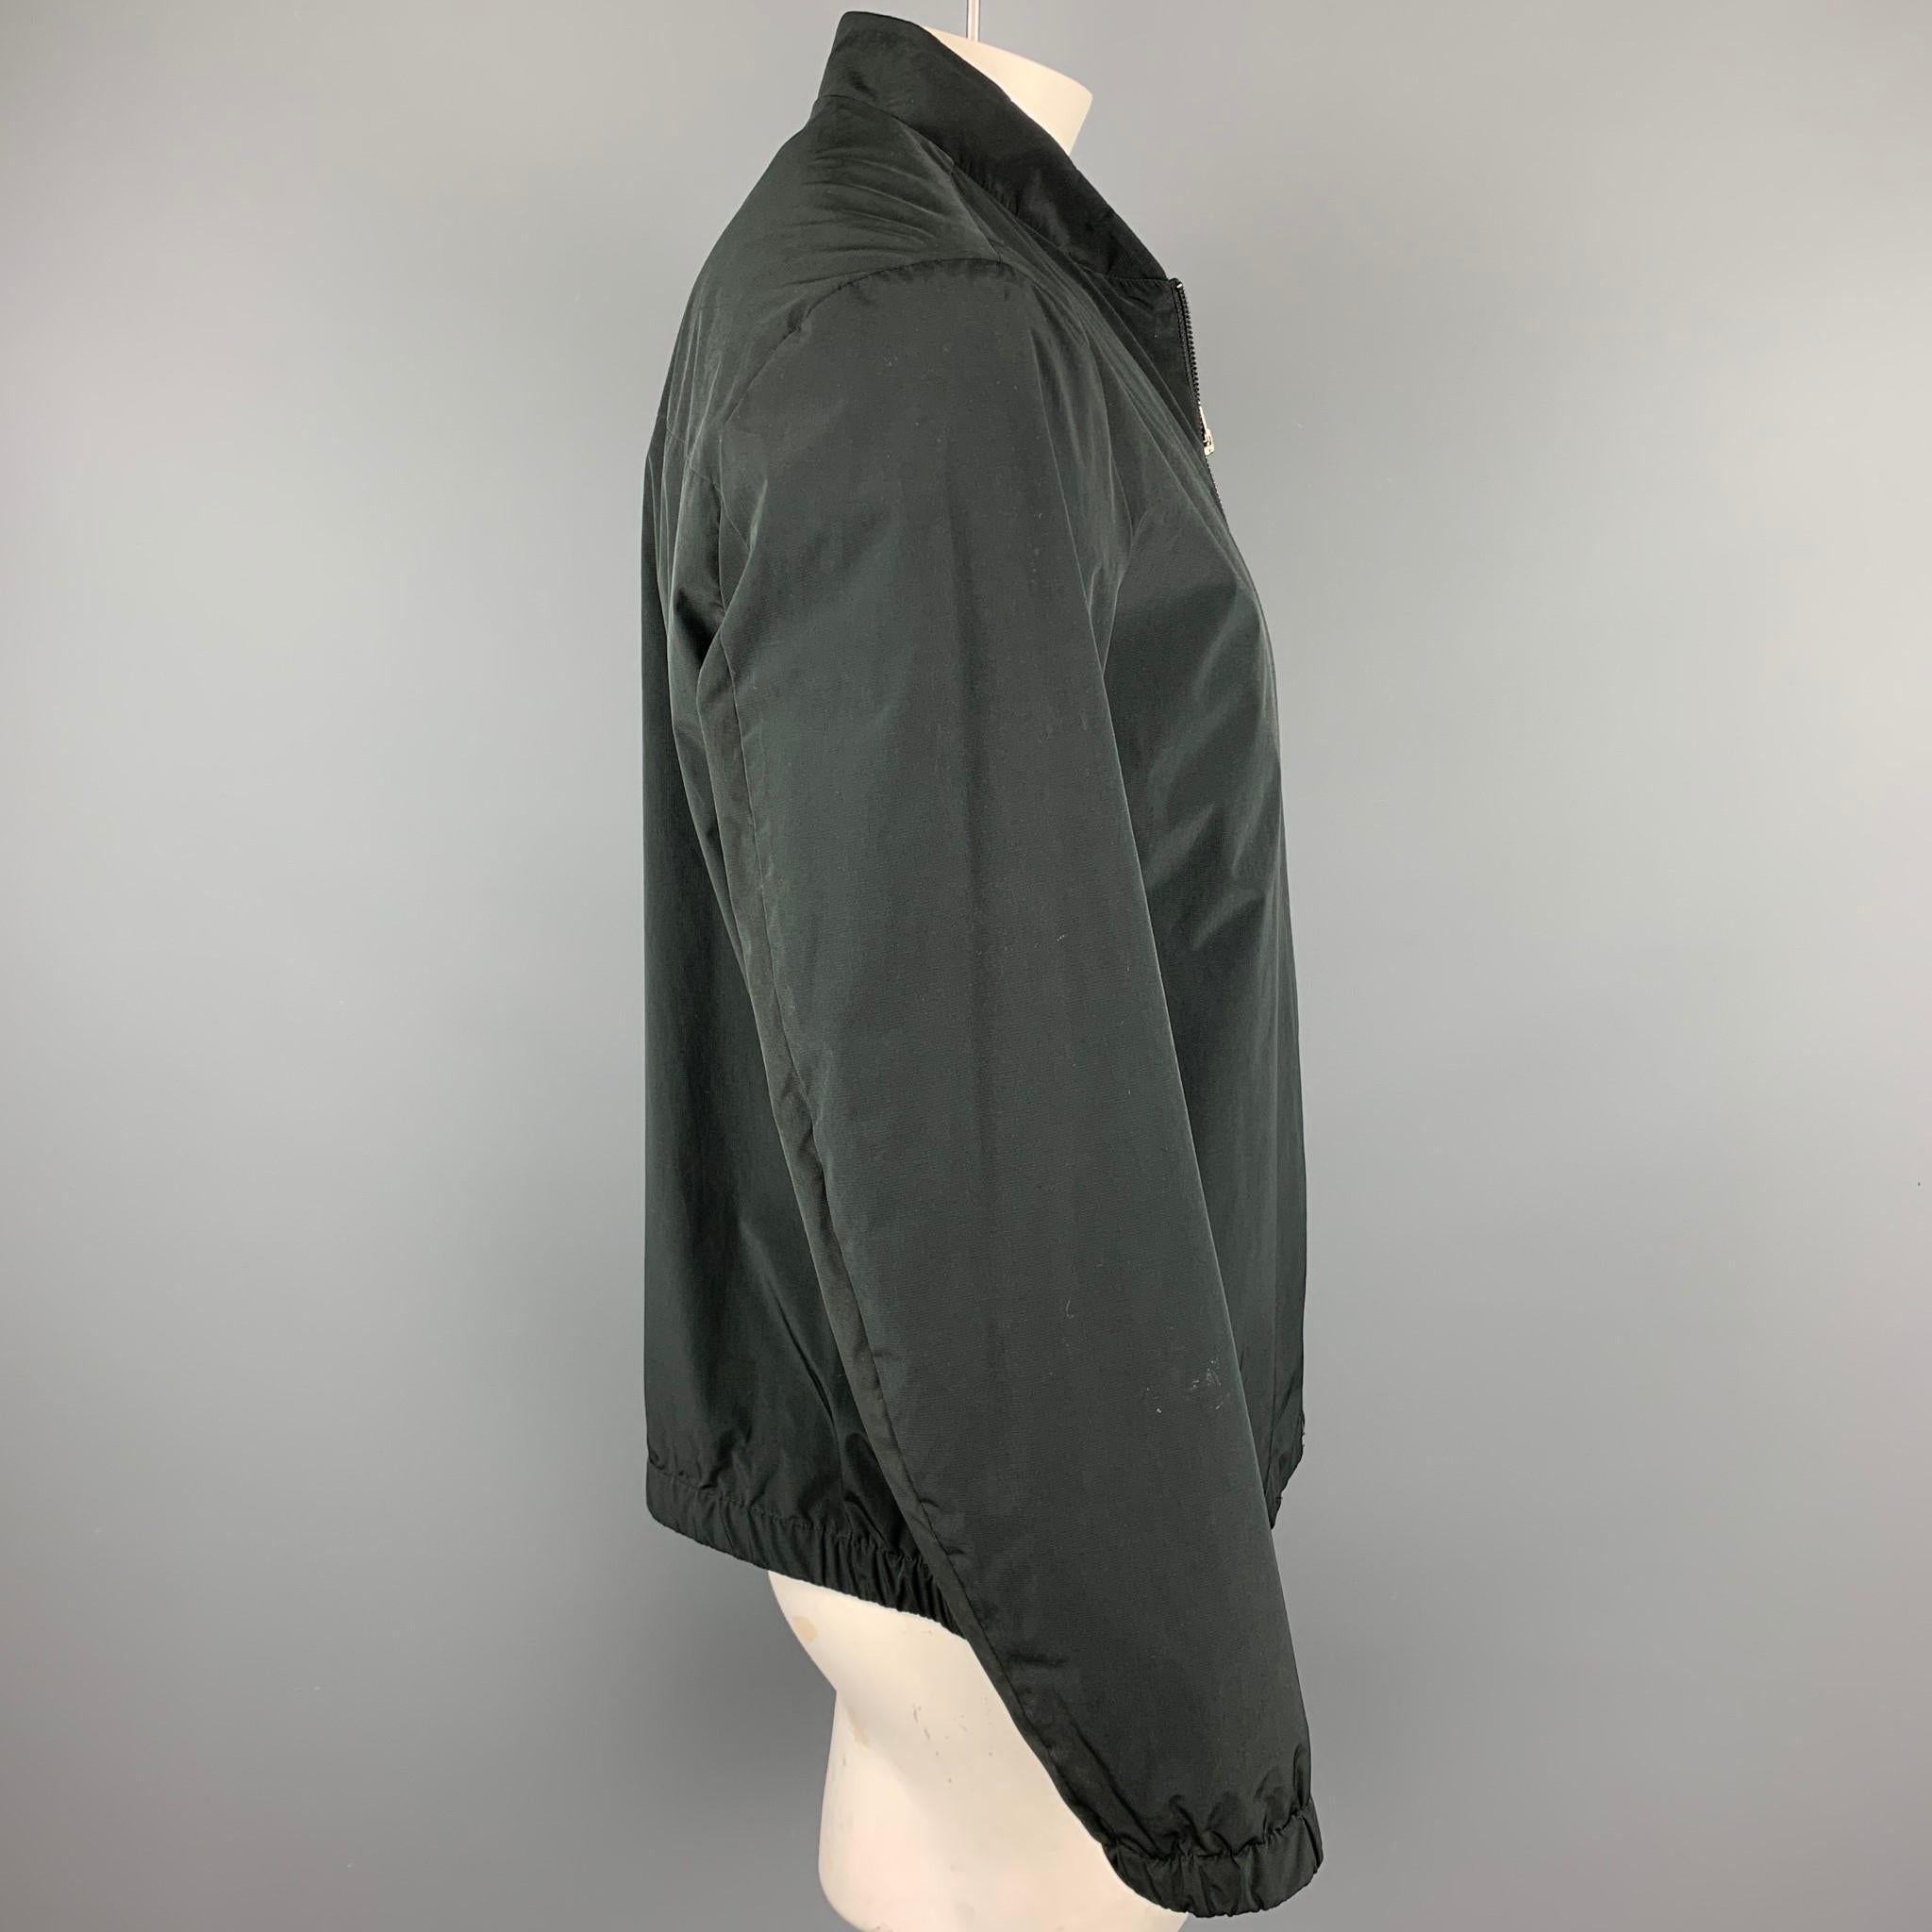 THEORY jacket comes in a black polyester / nylon featuring a ribbed collar, slit pockets, and a full zip closure. Minor wear throughout. As-Is.

Good Pre-Owned Condition.
Marked: XL

Measurements:

Shoulder: 19 in. 
Chest: 48 in. 
Sleeve: 26 in.